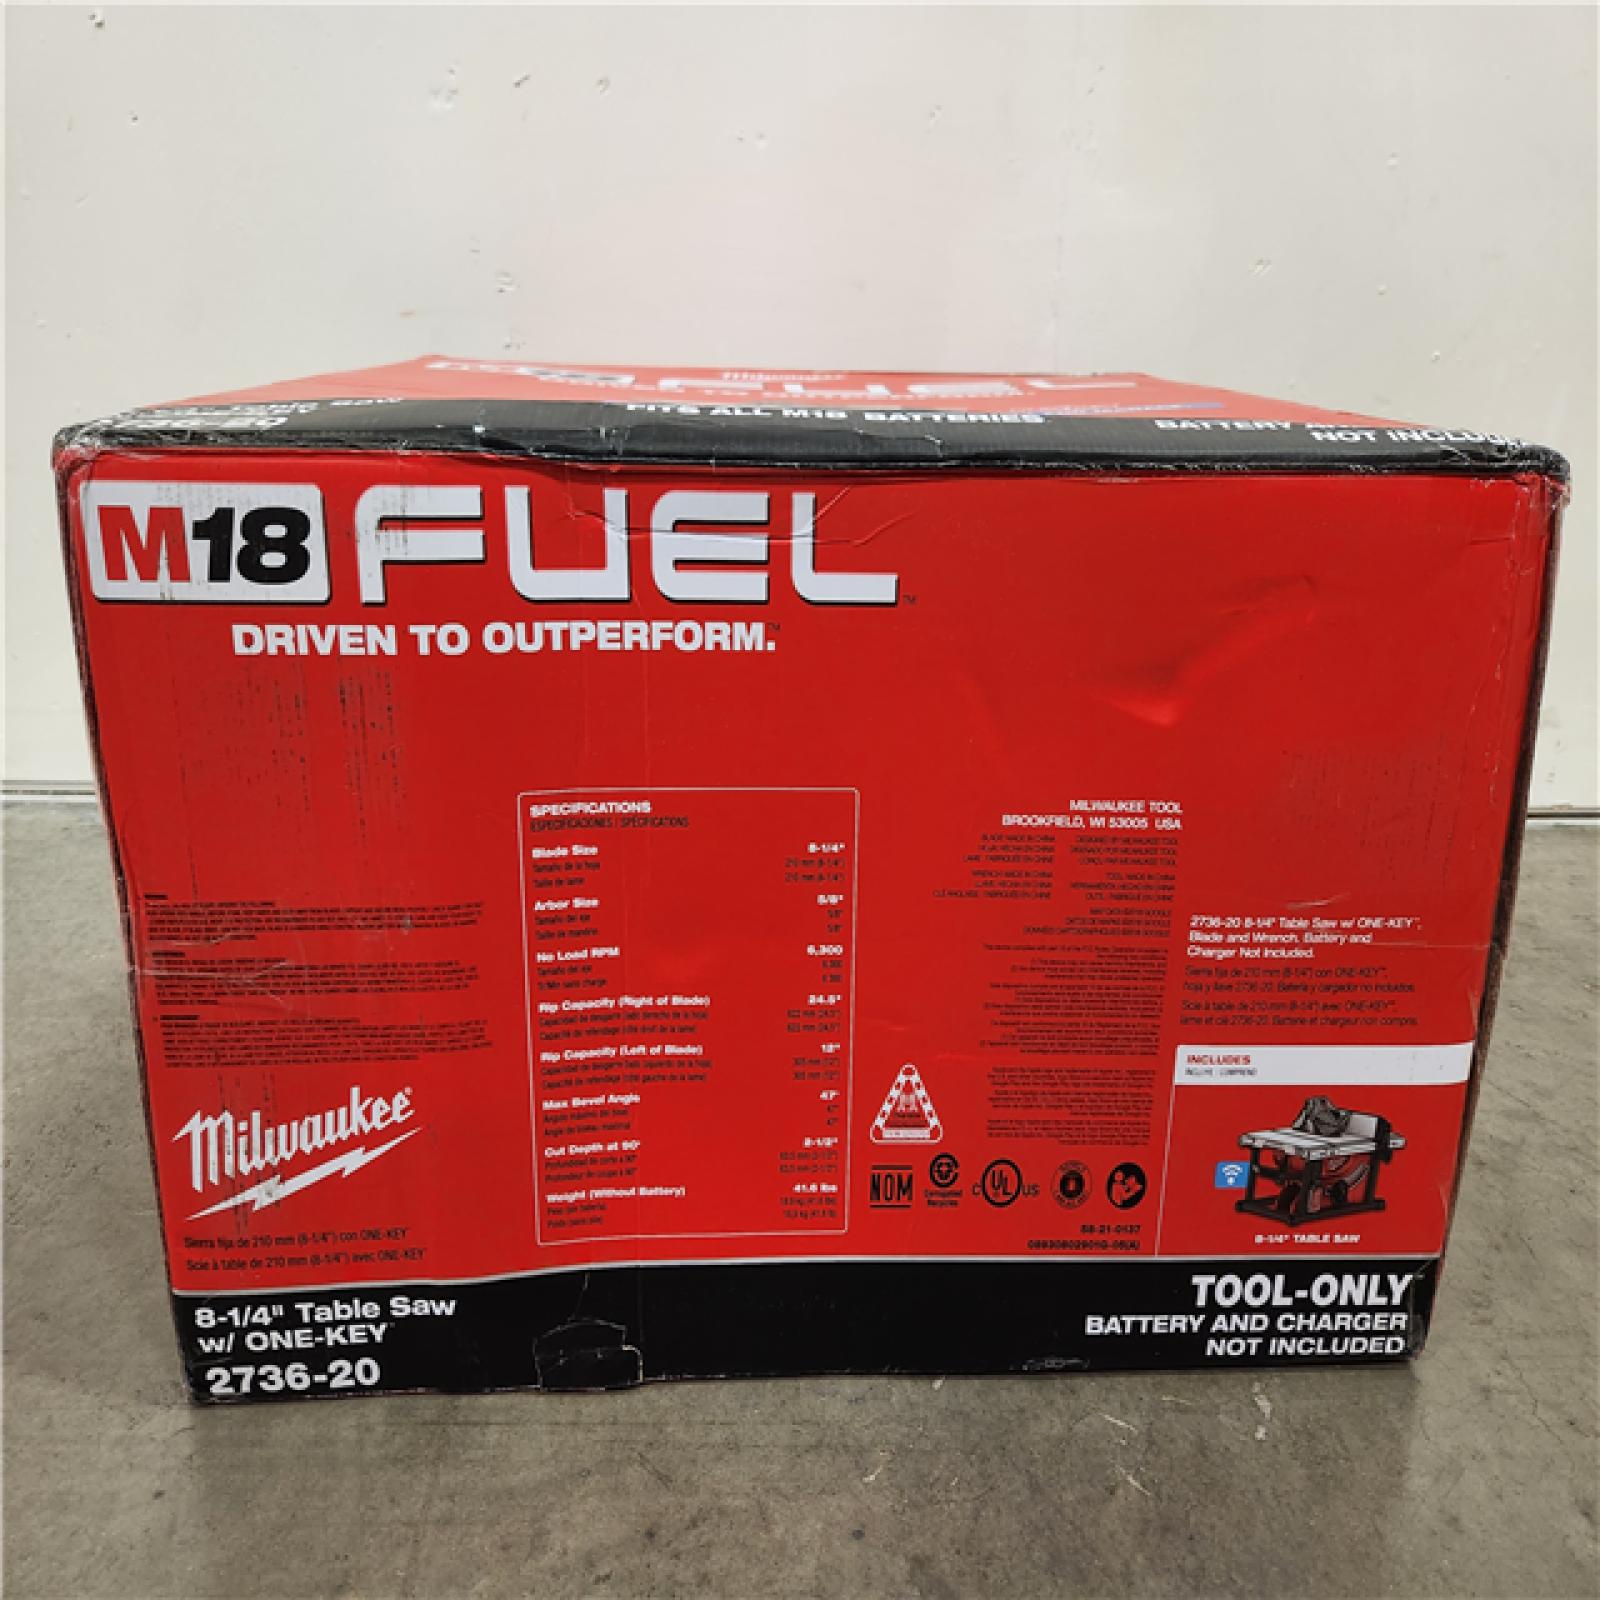 Phoenix Location NEWLY SEALED Milwaukee M18 FUEL ONE-KEY 18-Volt Lithium-Ion Brushless Cordless 8-1/4 in. Table Saw (Tool-Only)